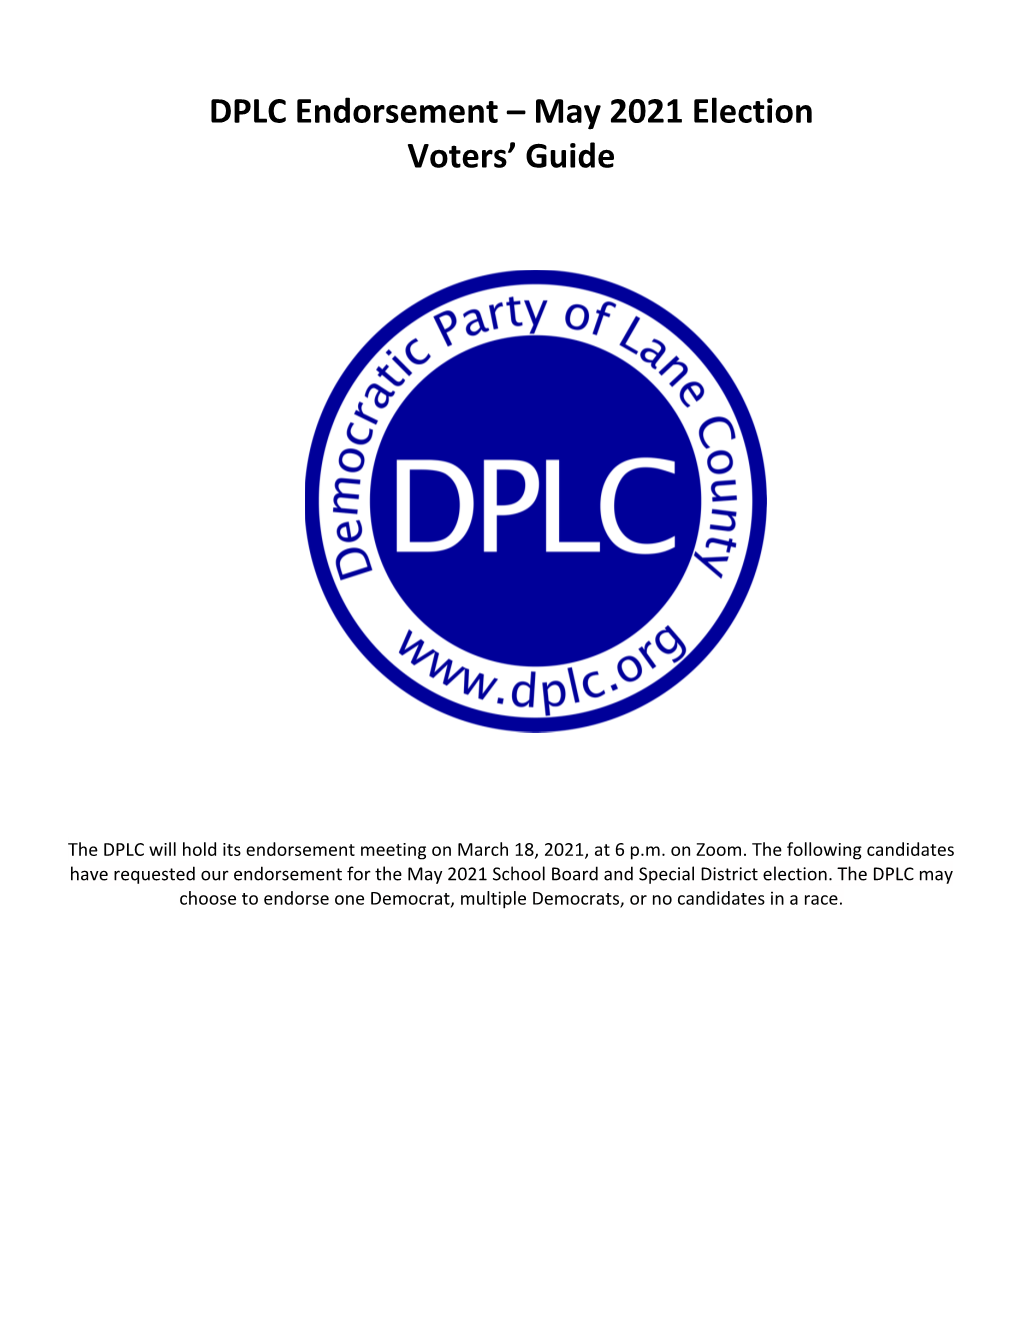 DPLC Endorsement – May 2021 Election Voters' Guide